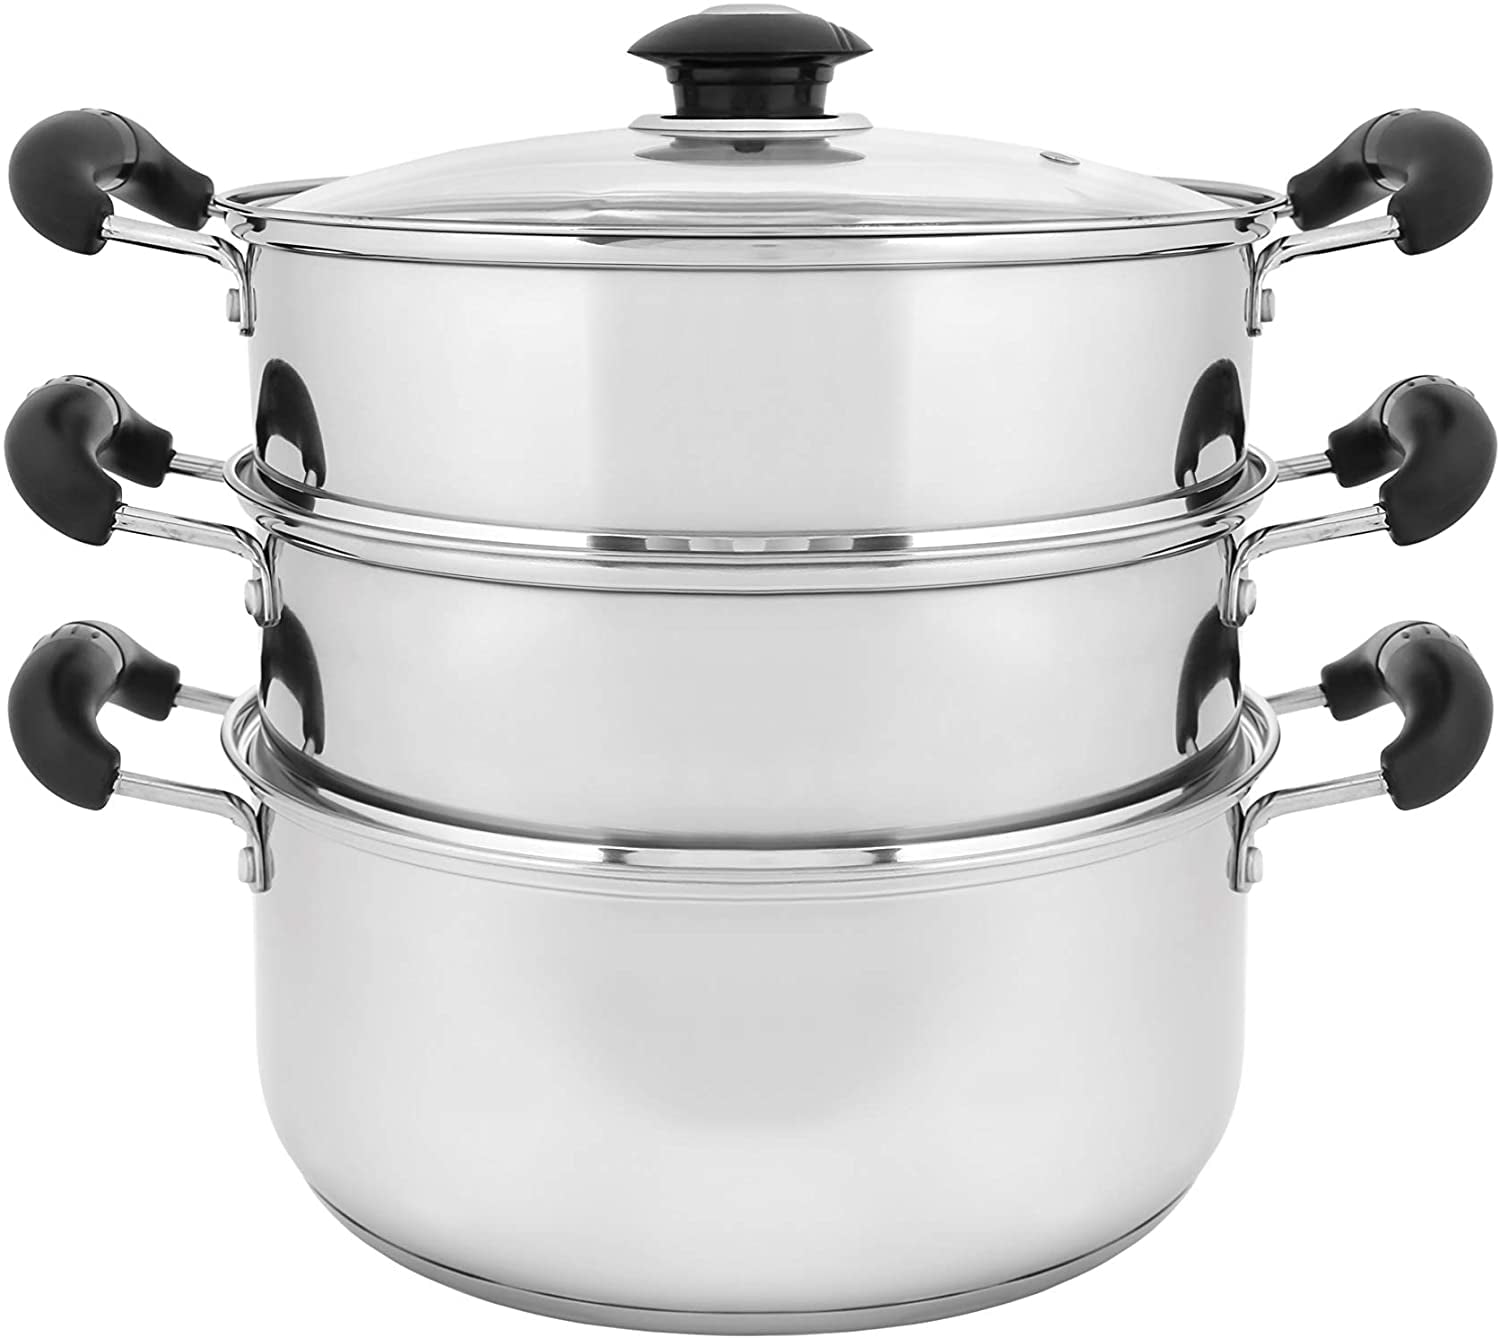 55cm commercial Stainless steel steamer 3 layers steam pot cooker Large  capacity electric cooking pot steamer